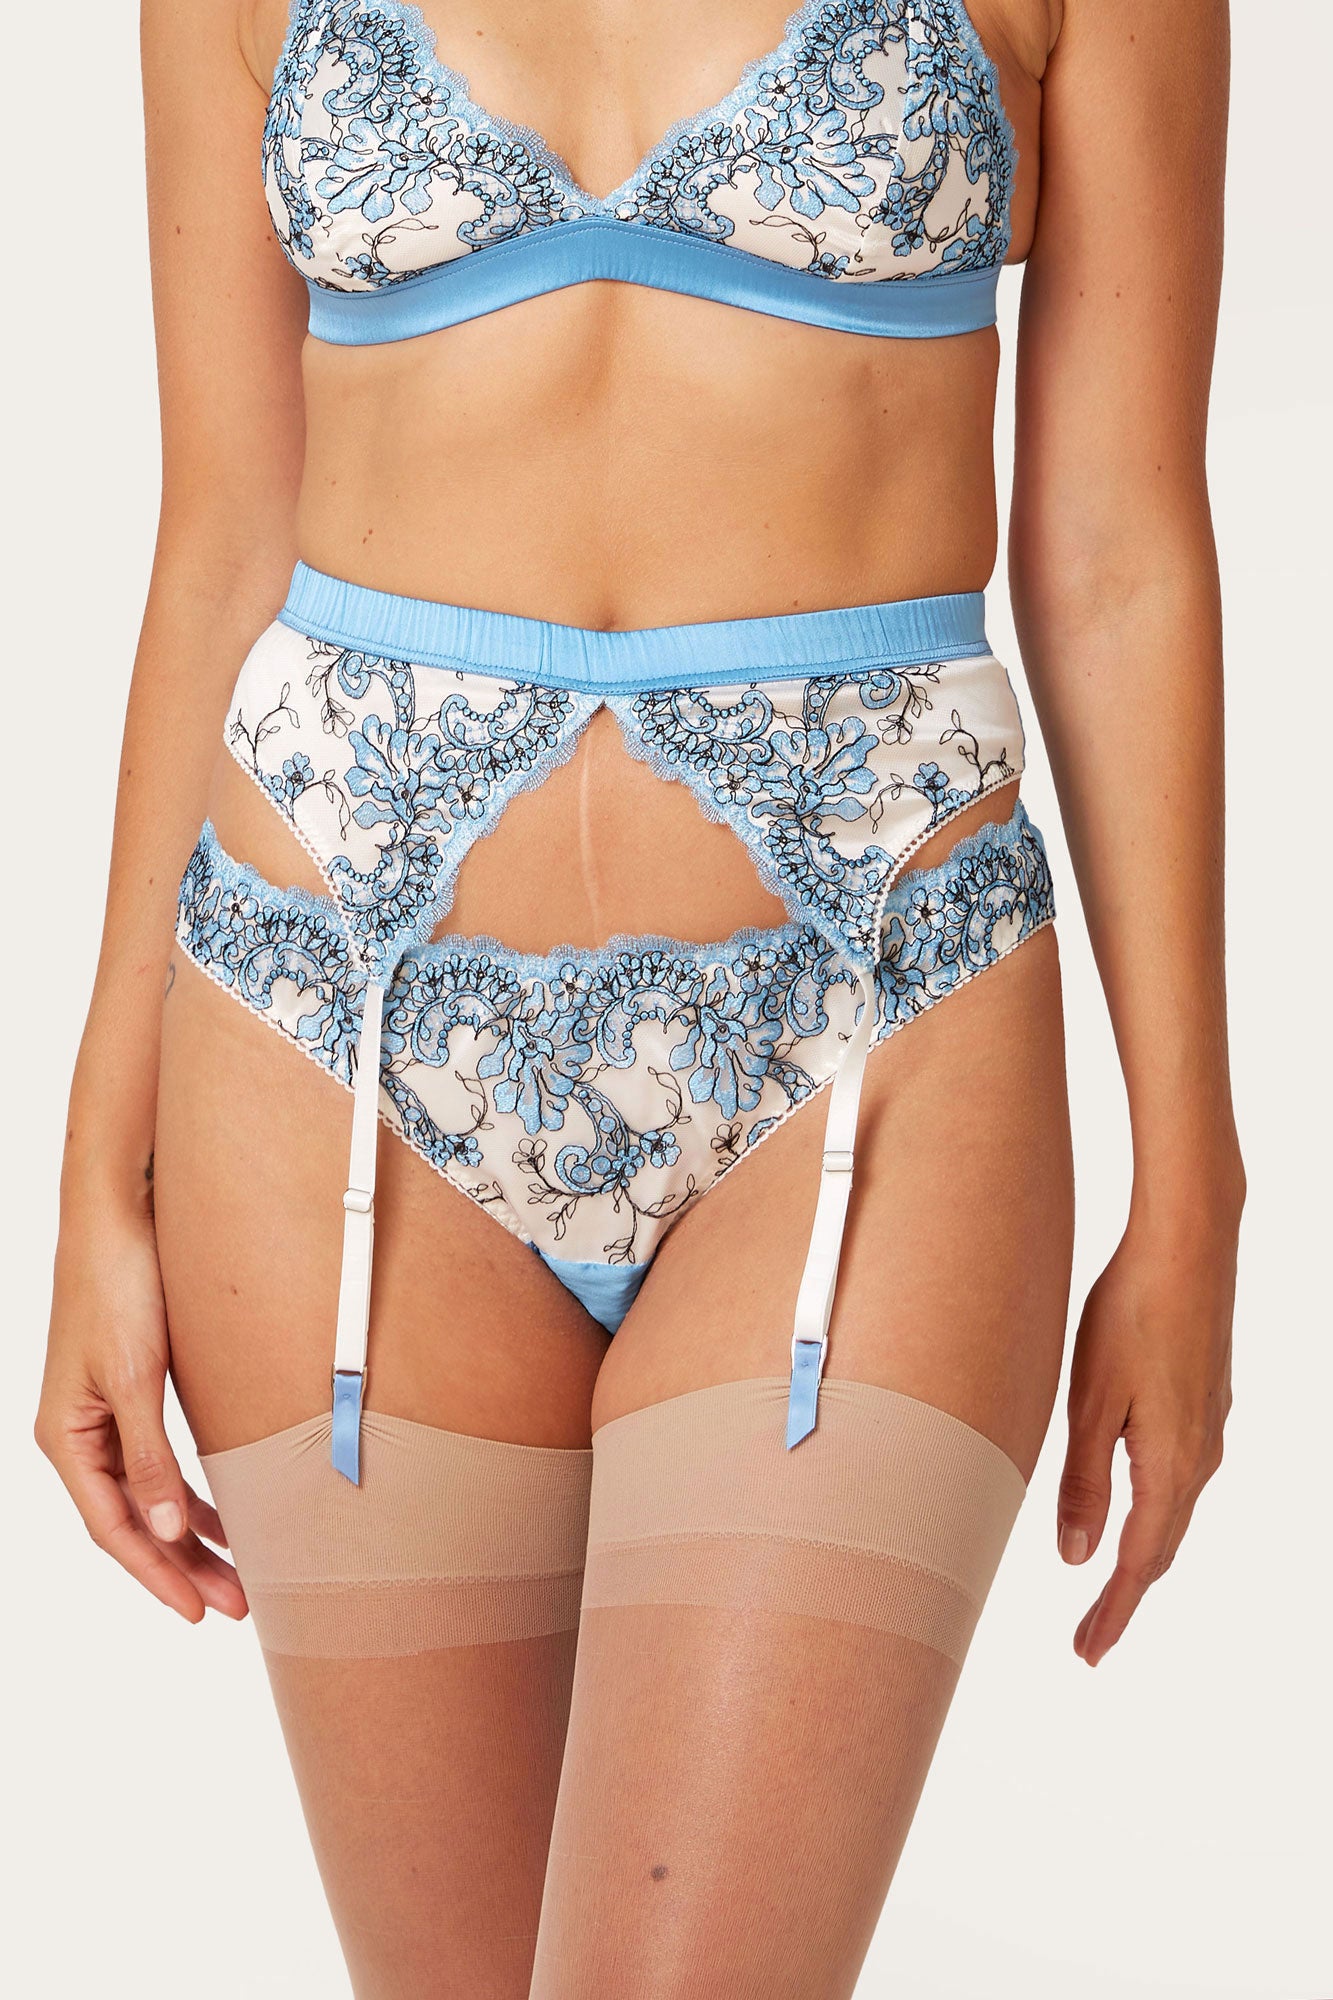 Portia blue silk knickers with floral embroidery in black and white silk